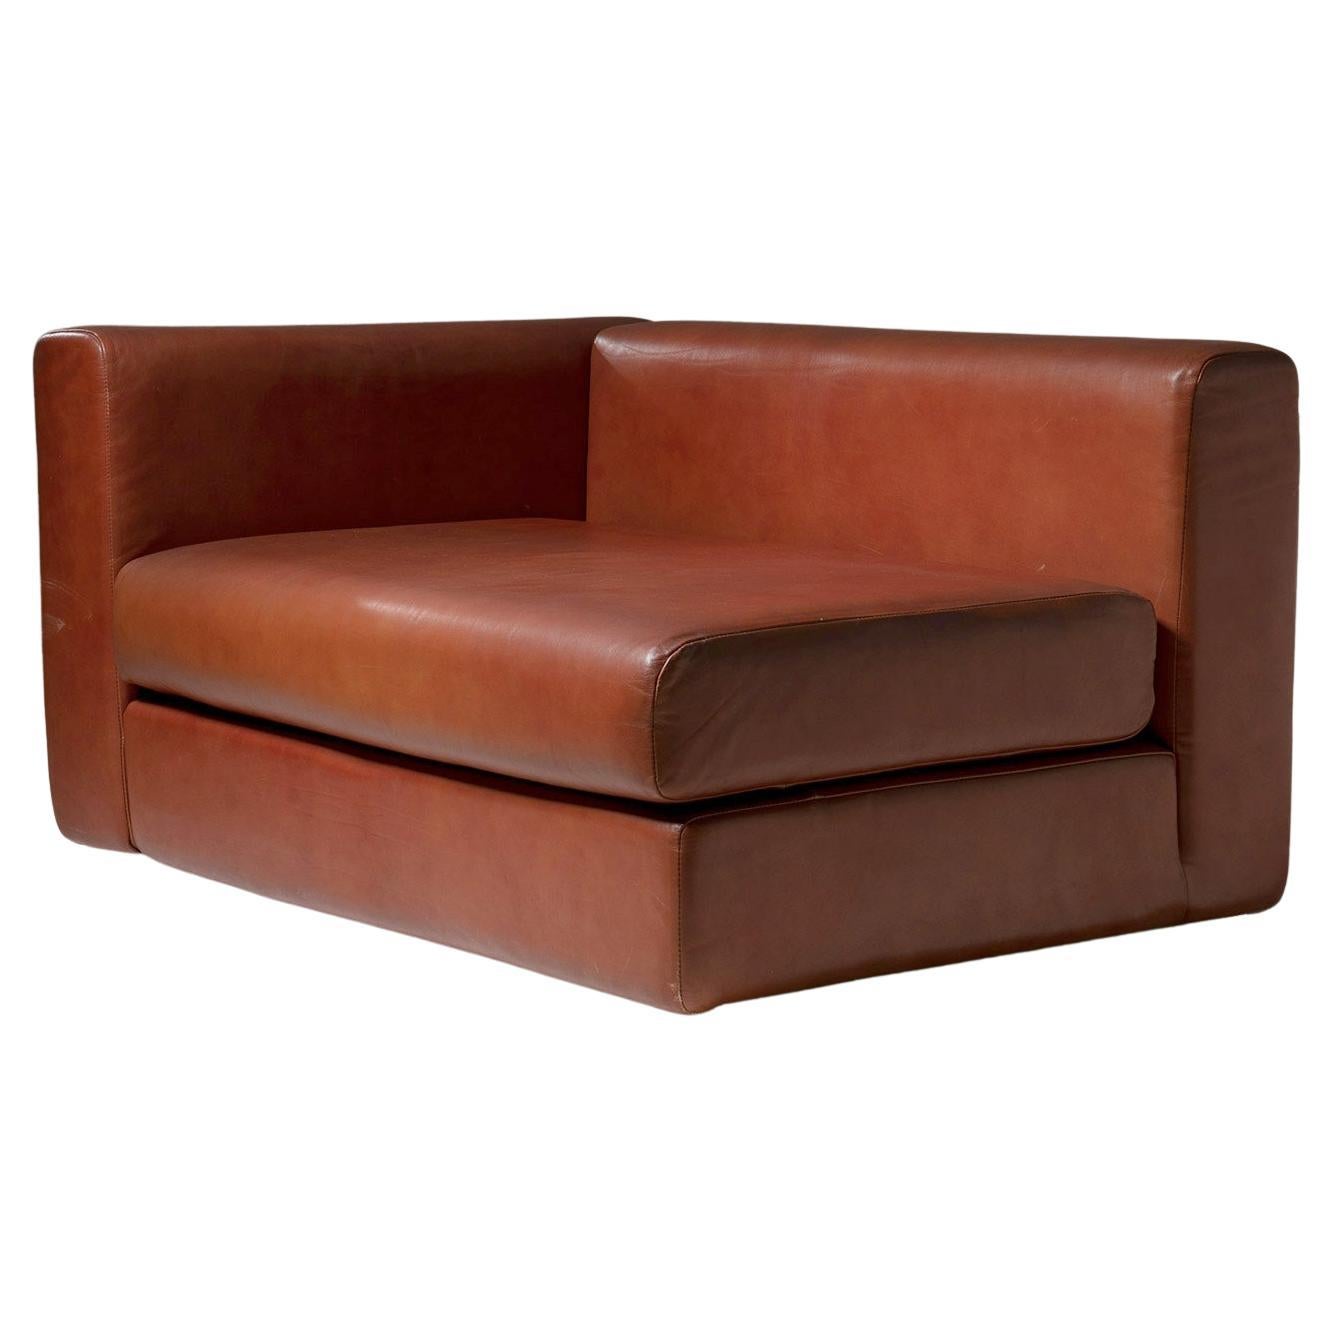 "Bacone" Corner Leather Lounge Chair by Cini Boeri for Arflex, Italy, 1970s For Sale